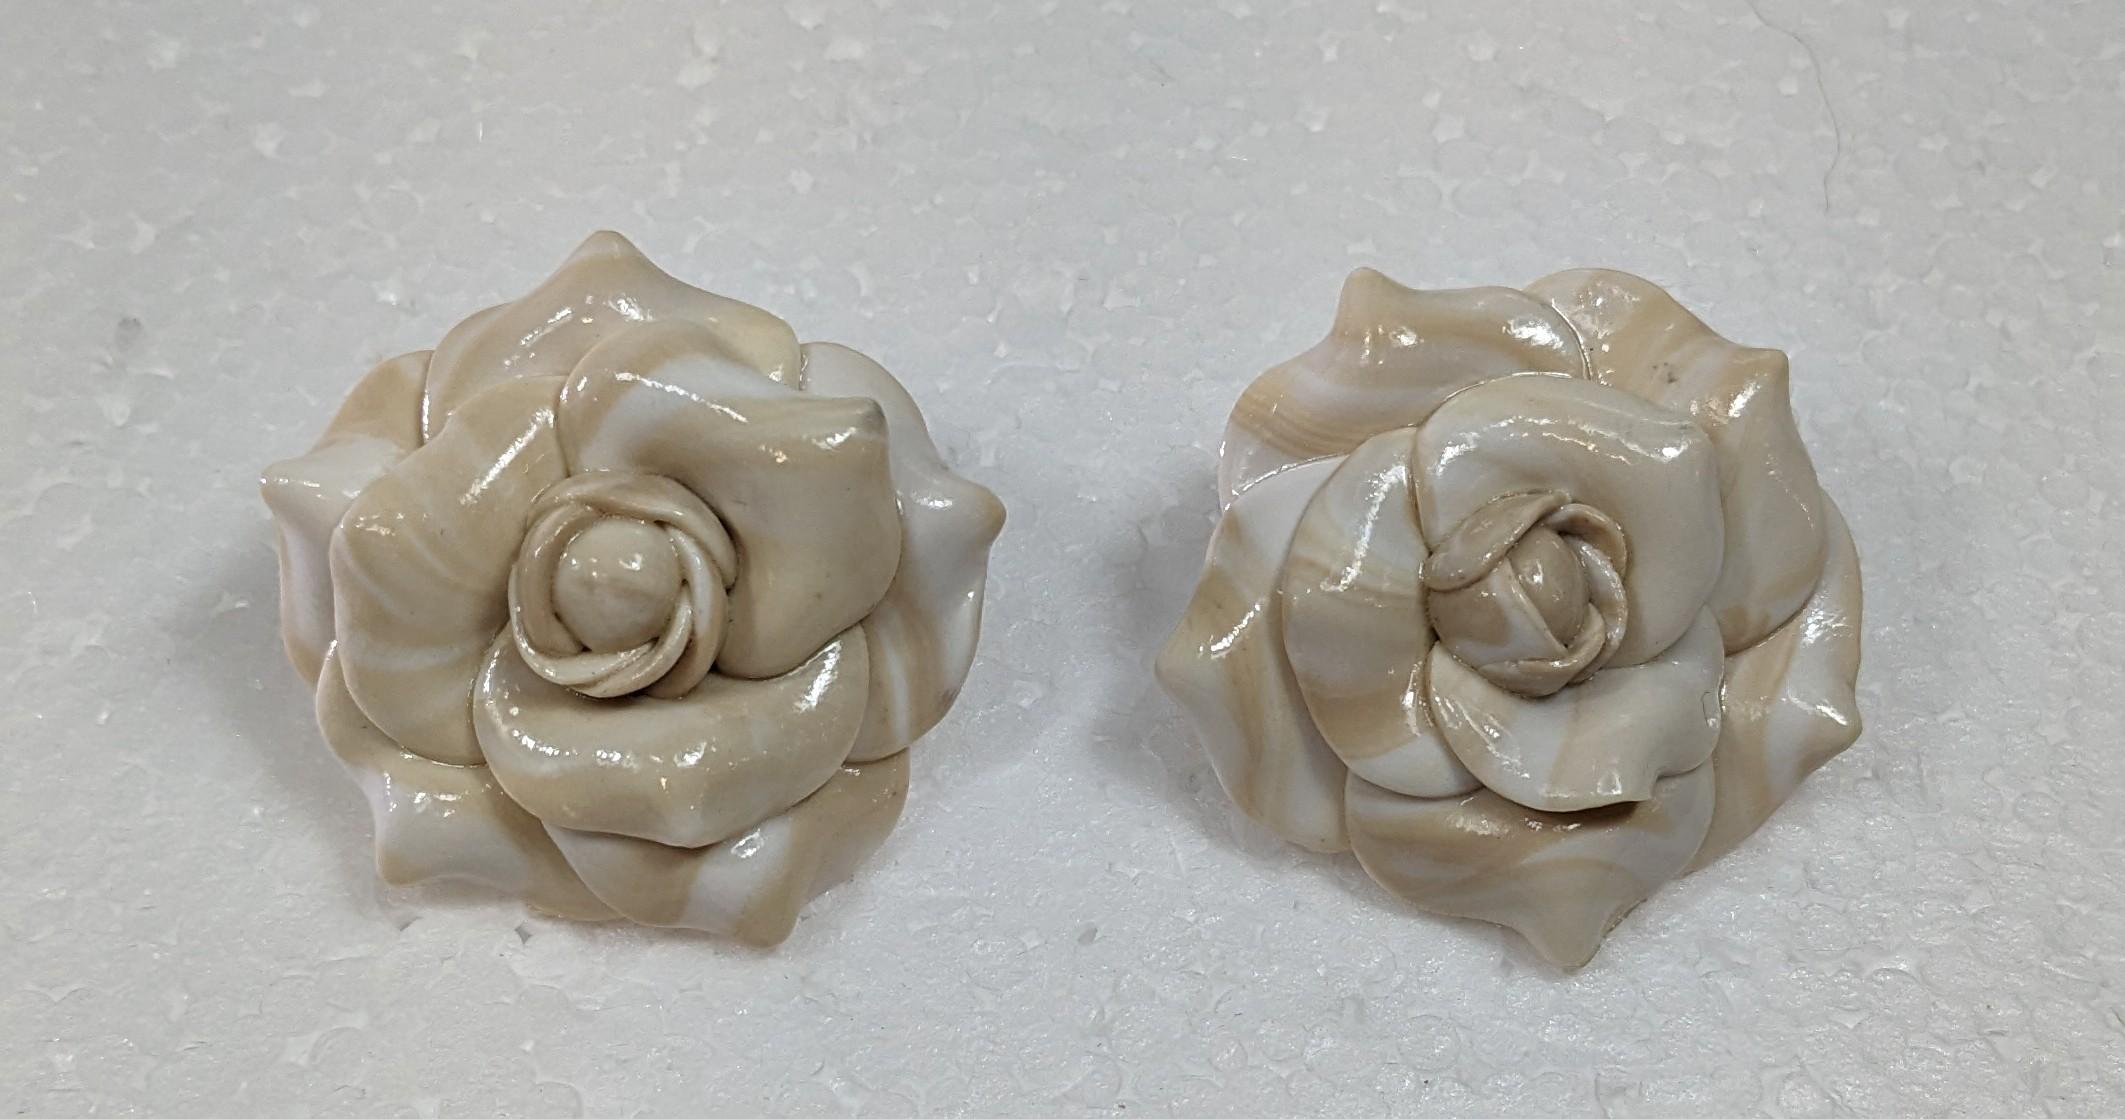 Beige Camelia Polymer  Clay Earrings with golplated silver closure
Diameter: 4 cm
Weight: 14 grams
Color  Beige
Handmade

Pradera Fashion Division  is specialized in European Fashion designers, clothing, handbags, accessories and as such we sell